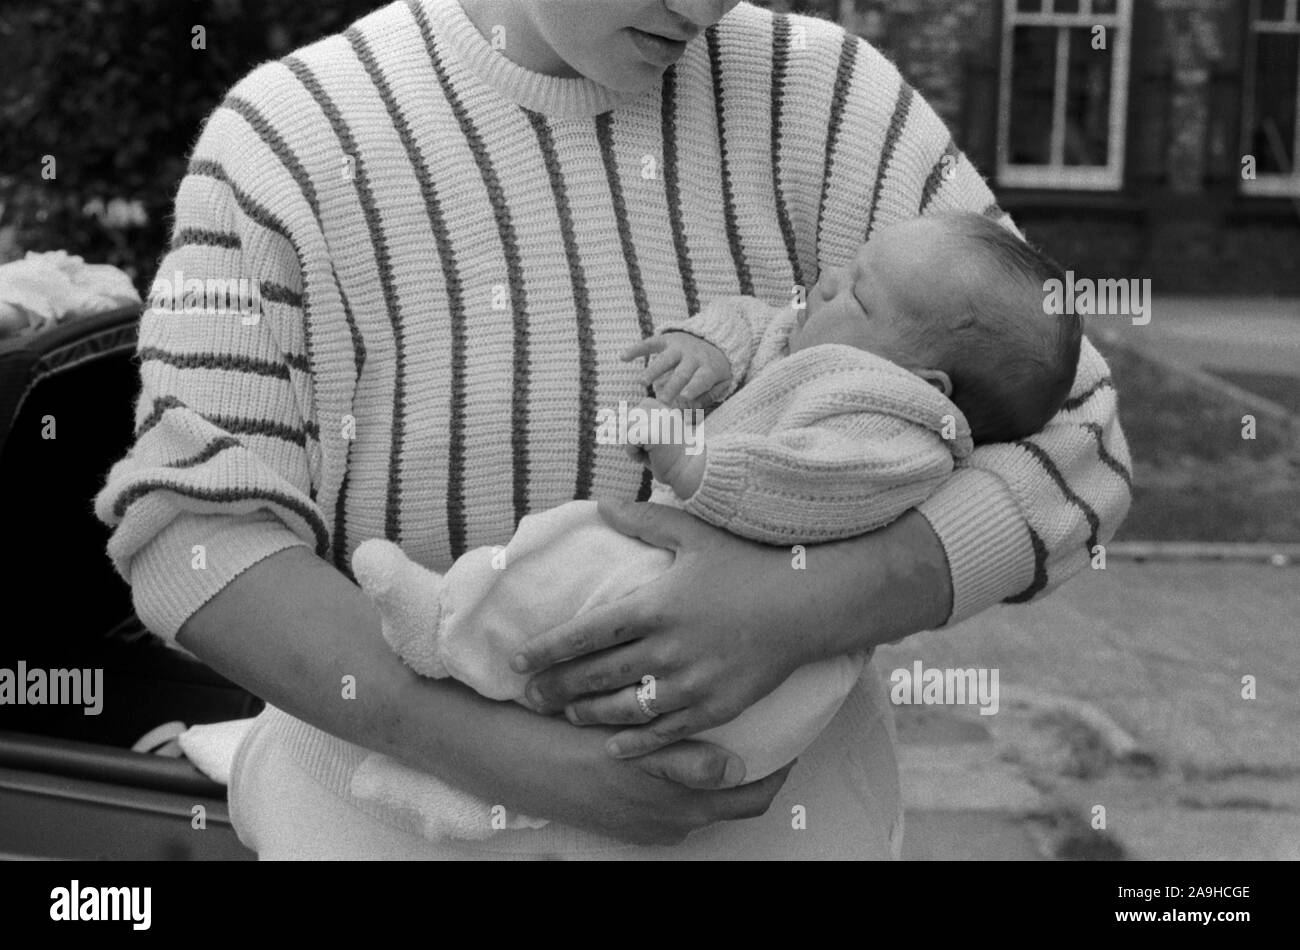 Prison UK 1986. New mother with her newborn baby, born in the prison. HM Prison Styal Wilmslow Cheshire 1980s. England HOMER SYKES Stock Photo